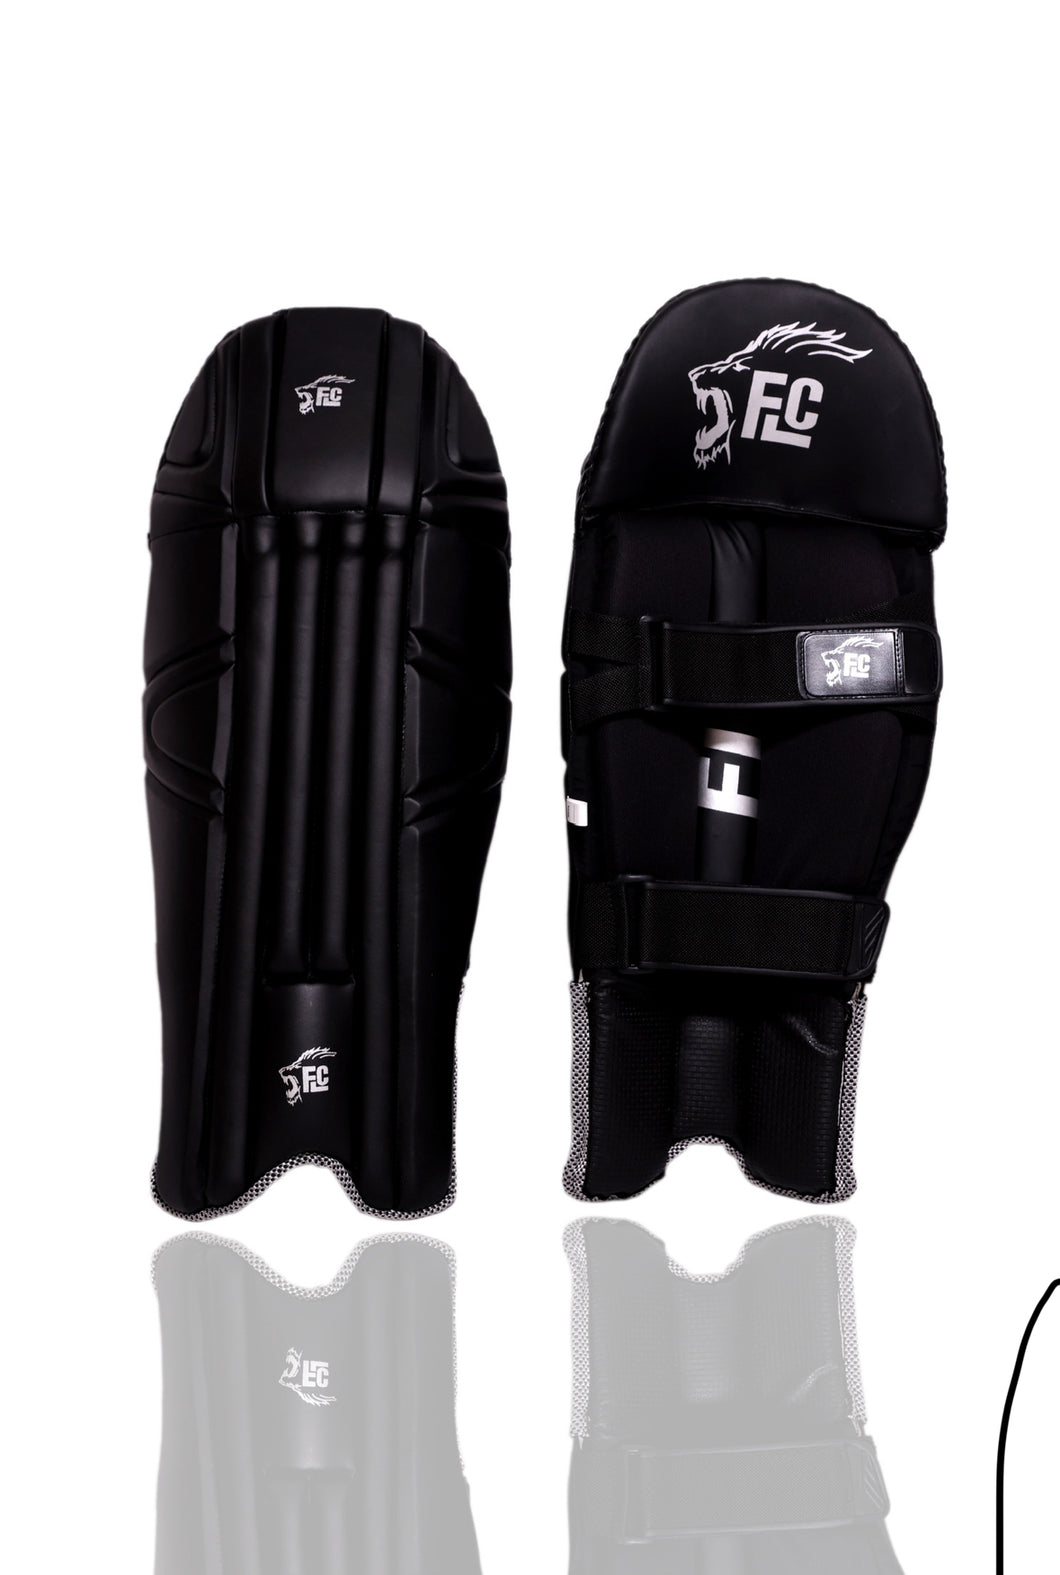 Limited Edition Wicket Keeping Pads - Black